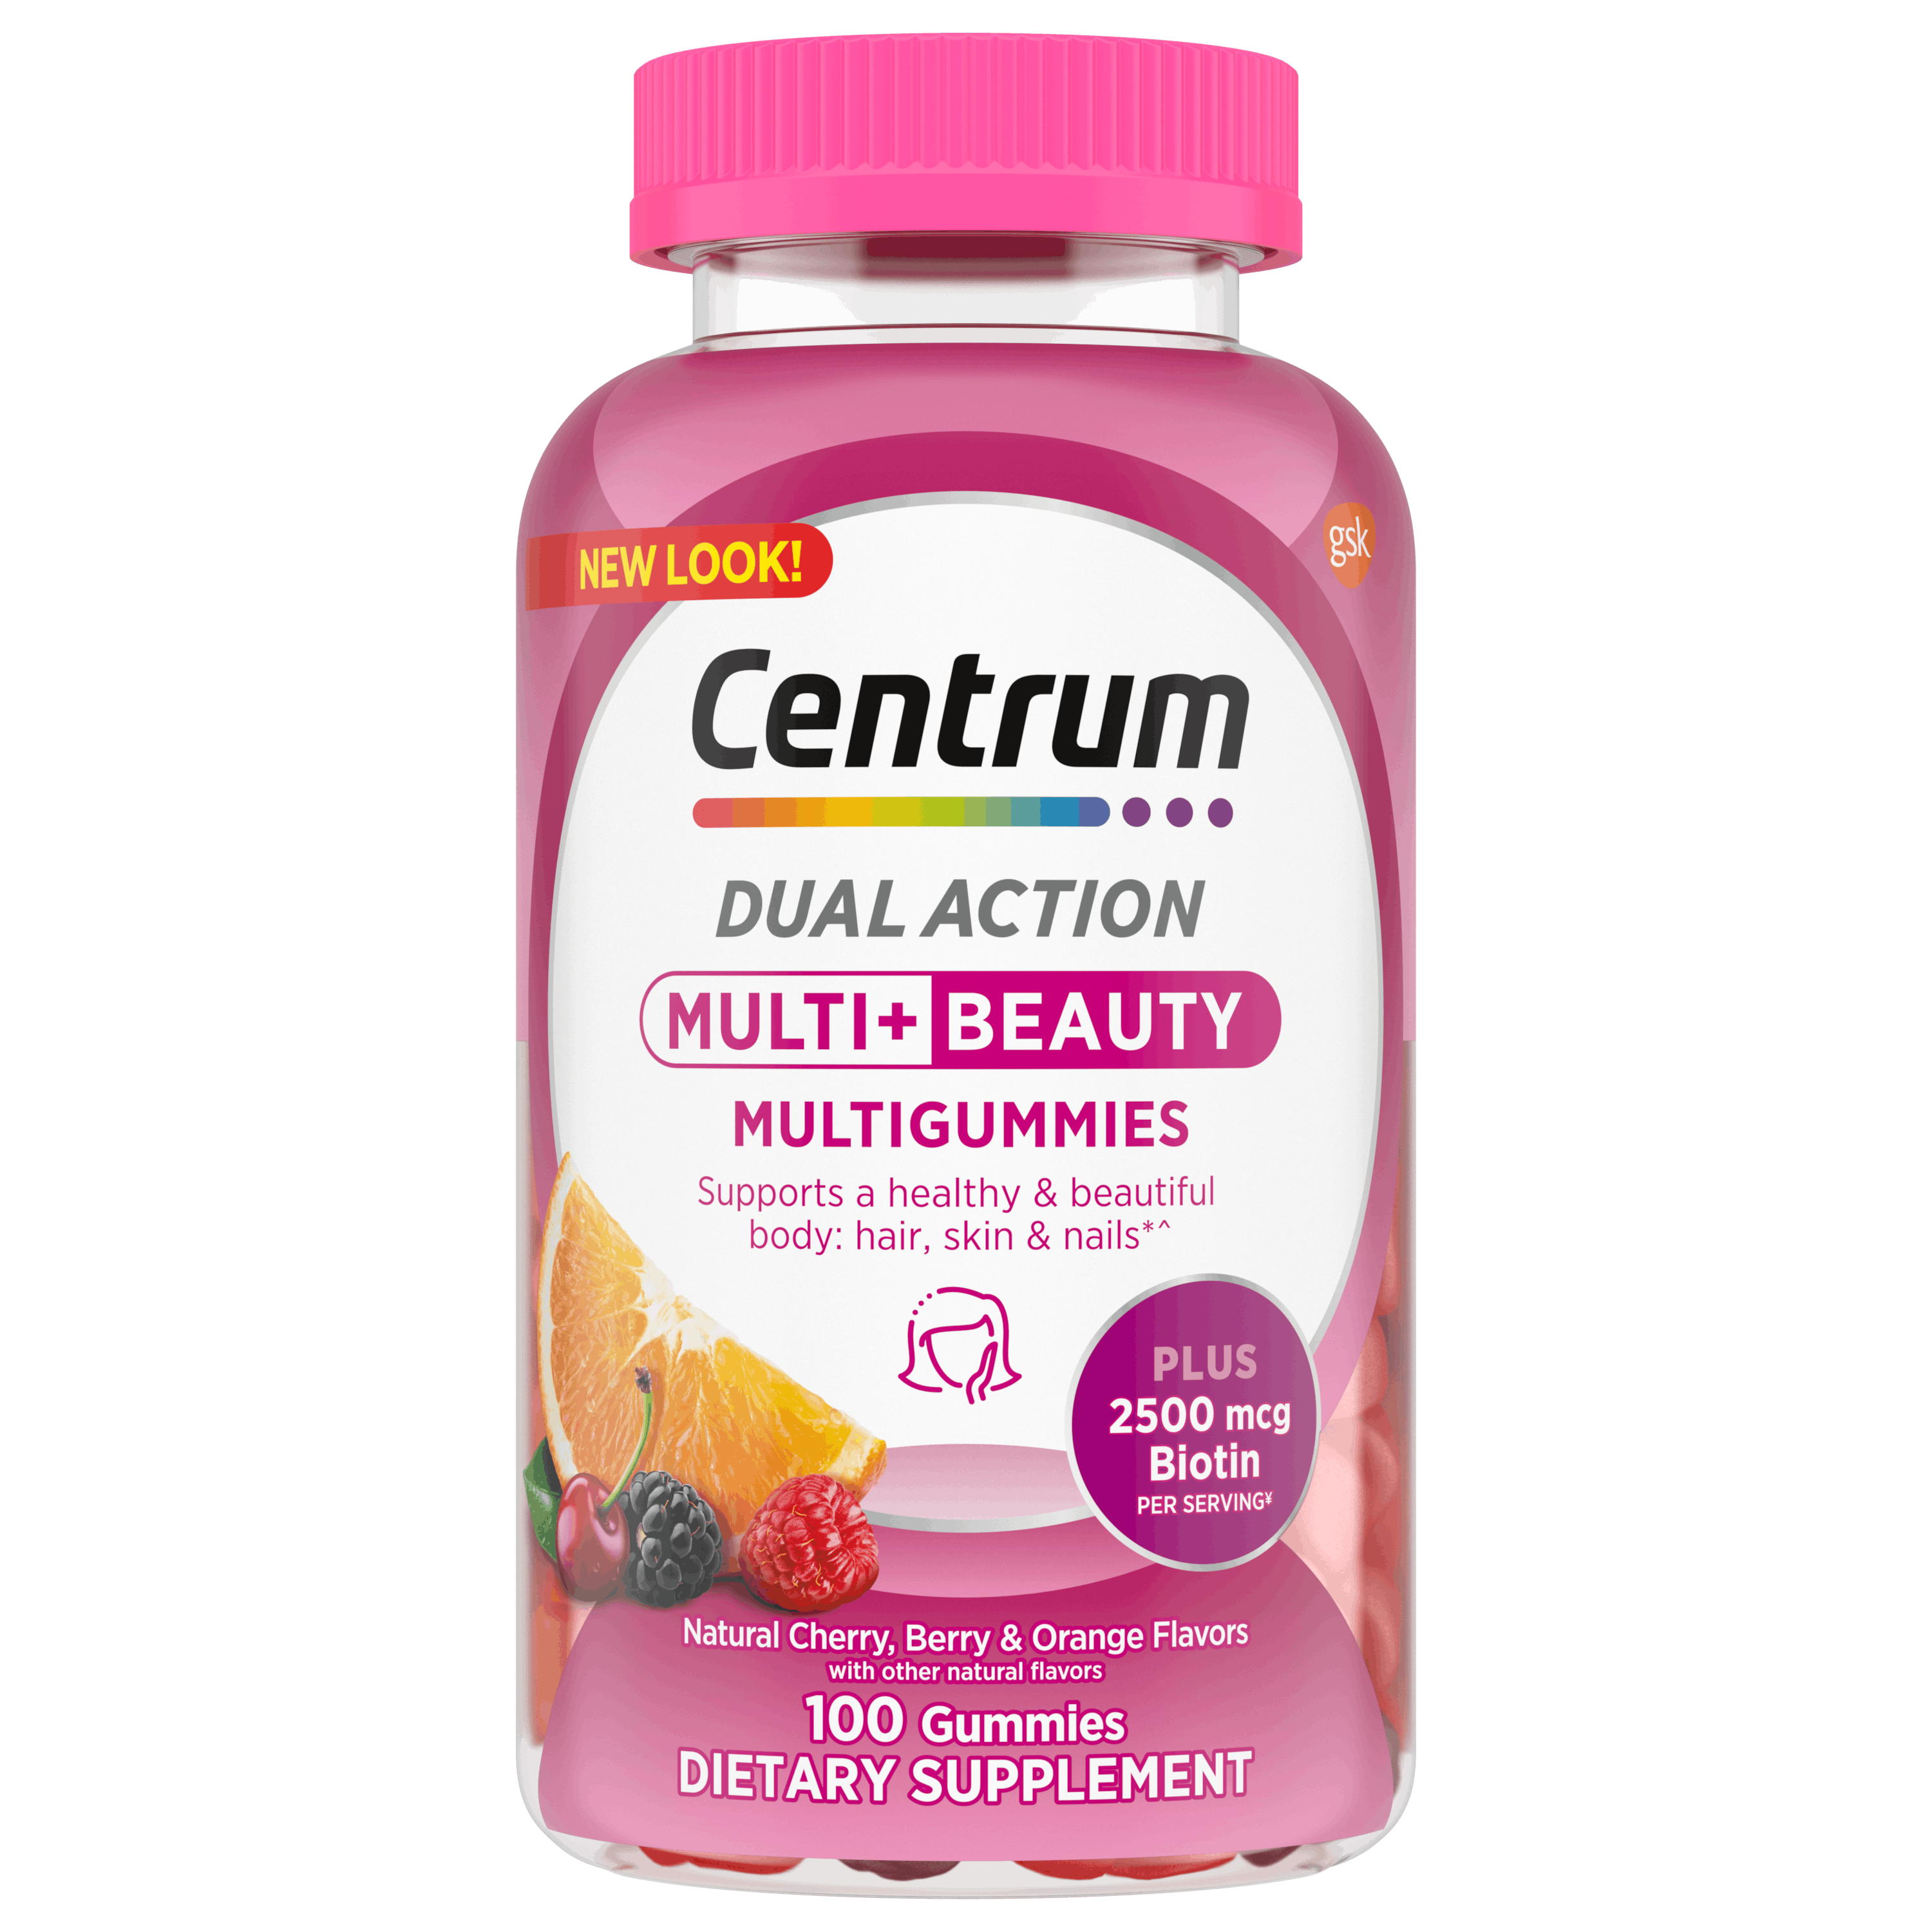 How to Choose the Best Multivitamin For You From Centrum